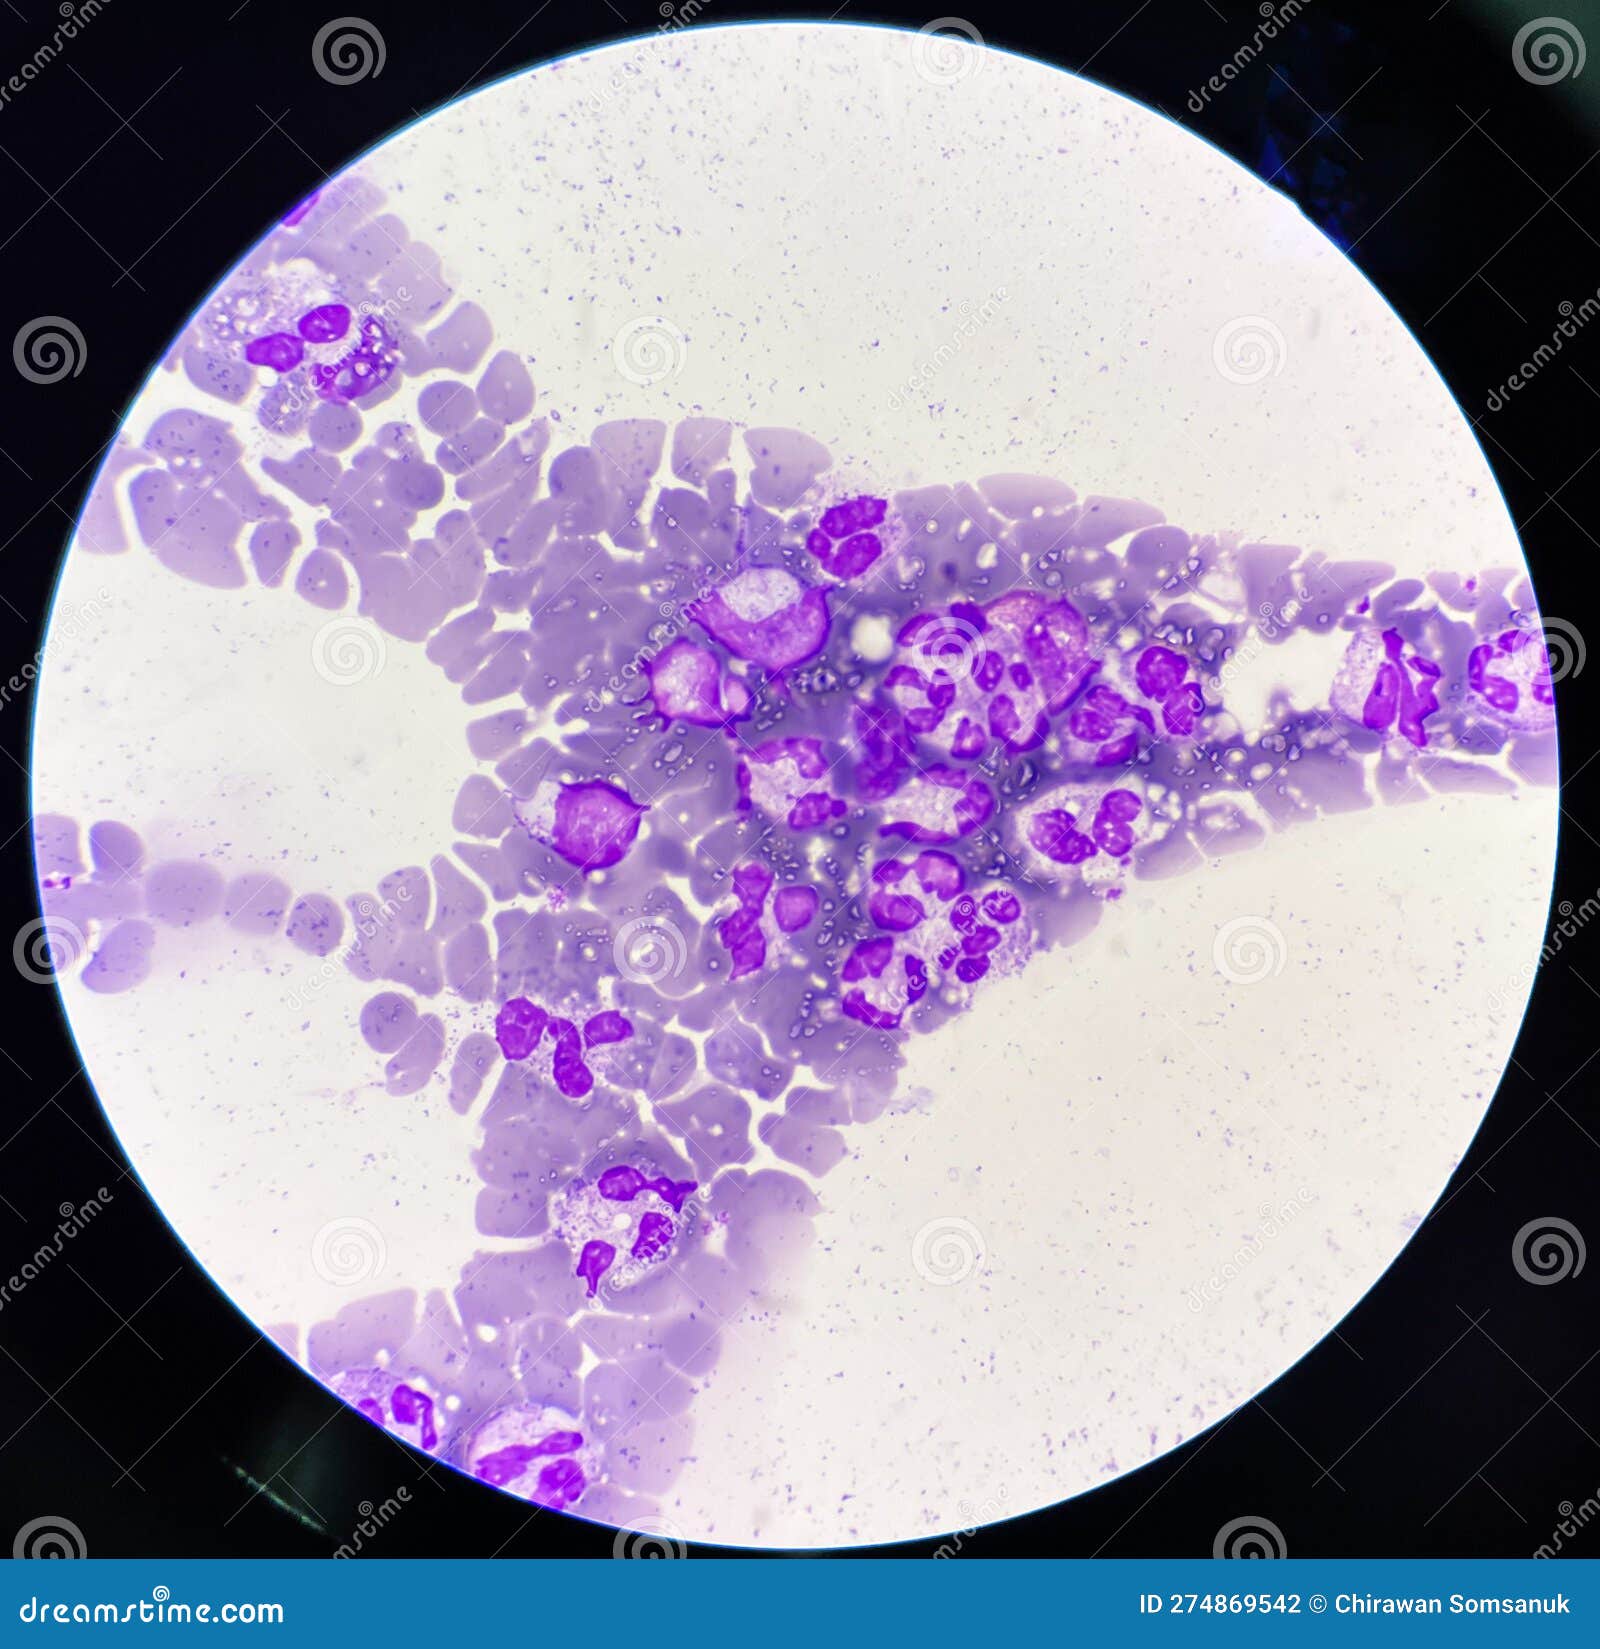 neutrophil with toxic granulation and vacuole